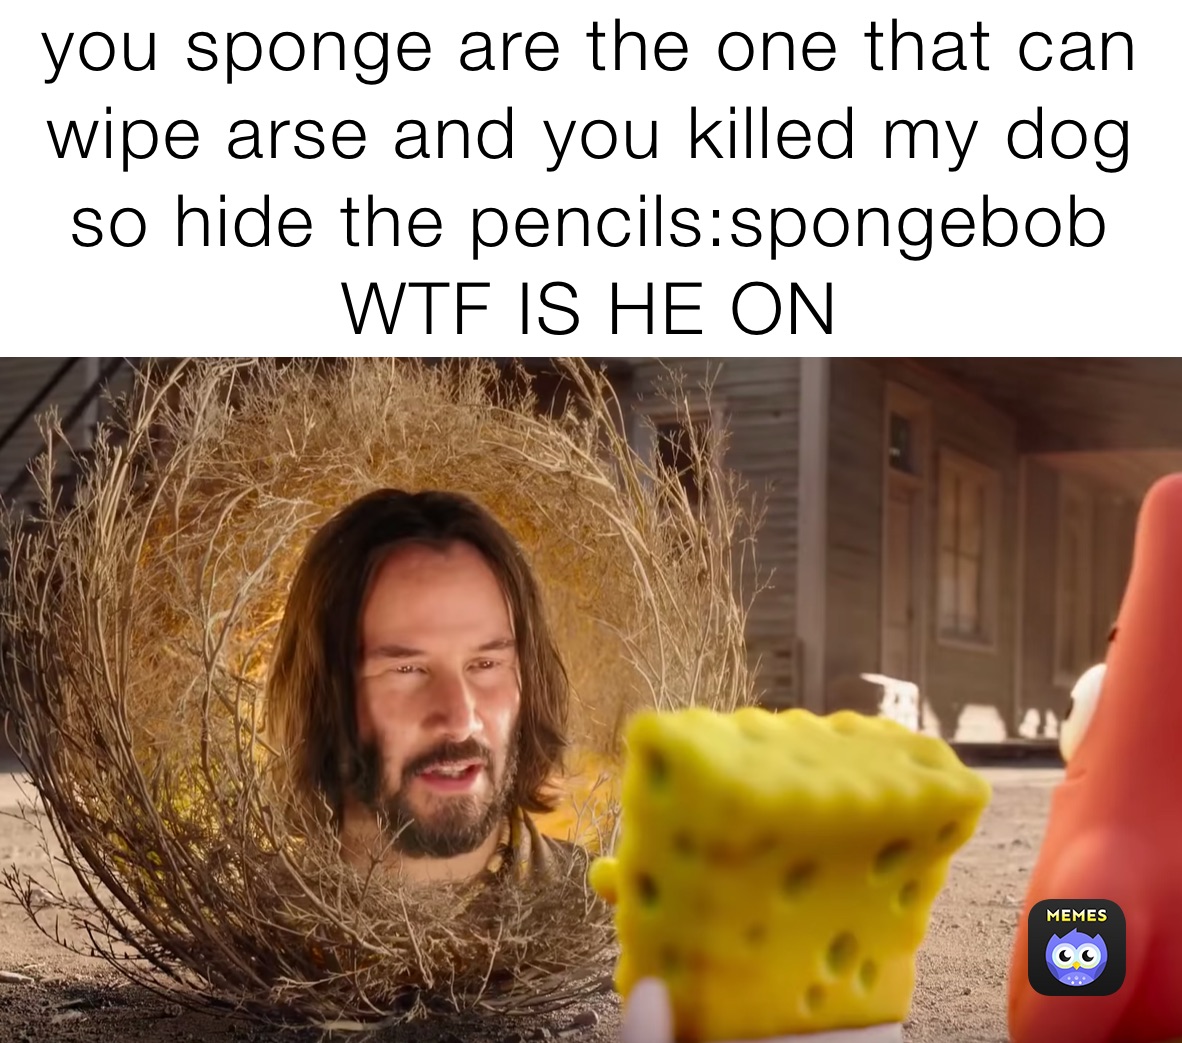 you sponge are the one that can wipe arse and you killed my dog so hide the pencils:spongebob WTF IS HE ON